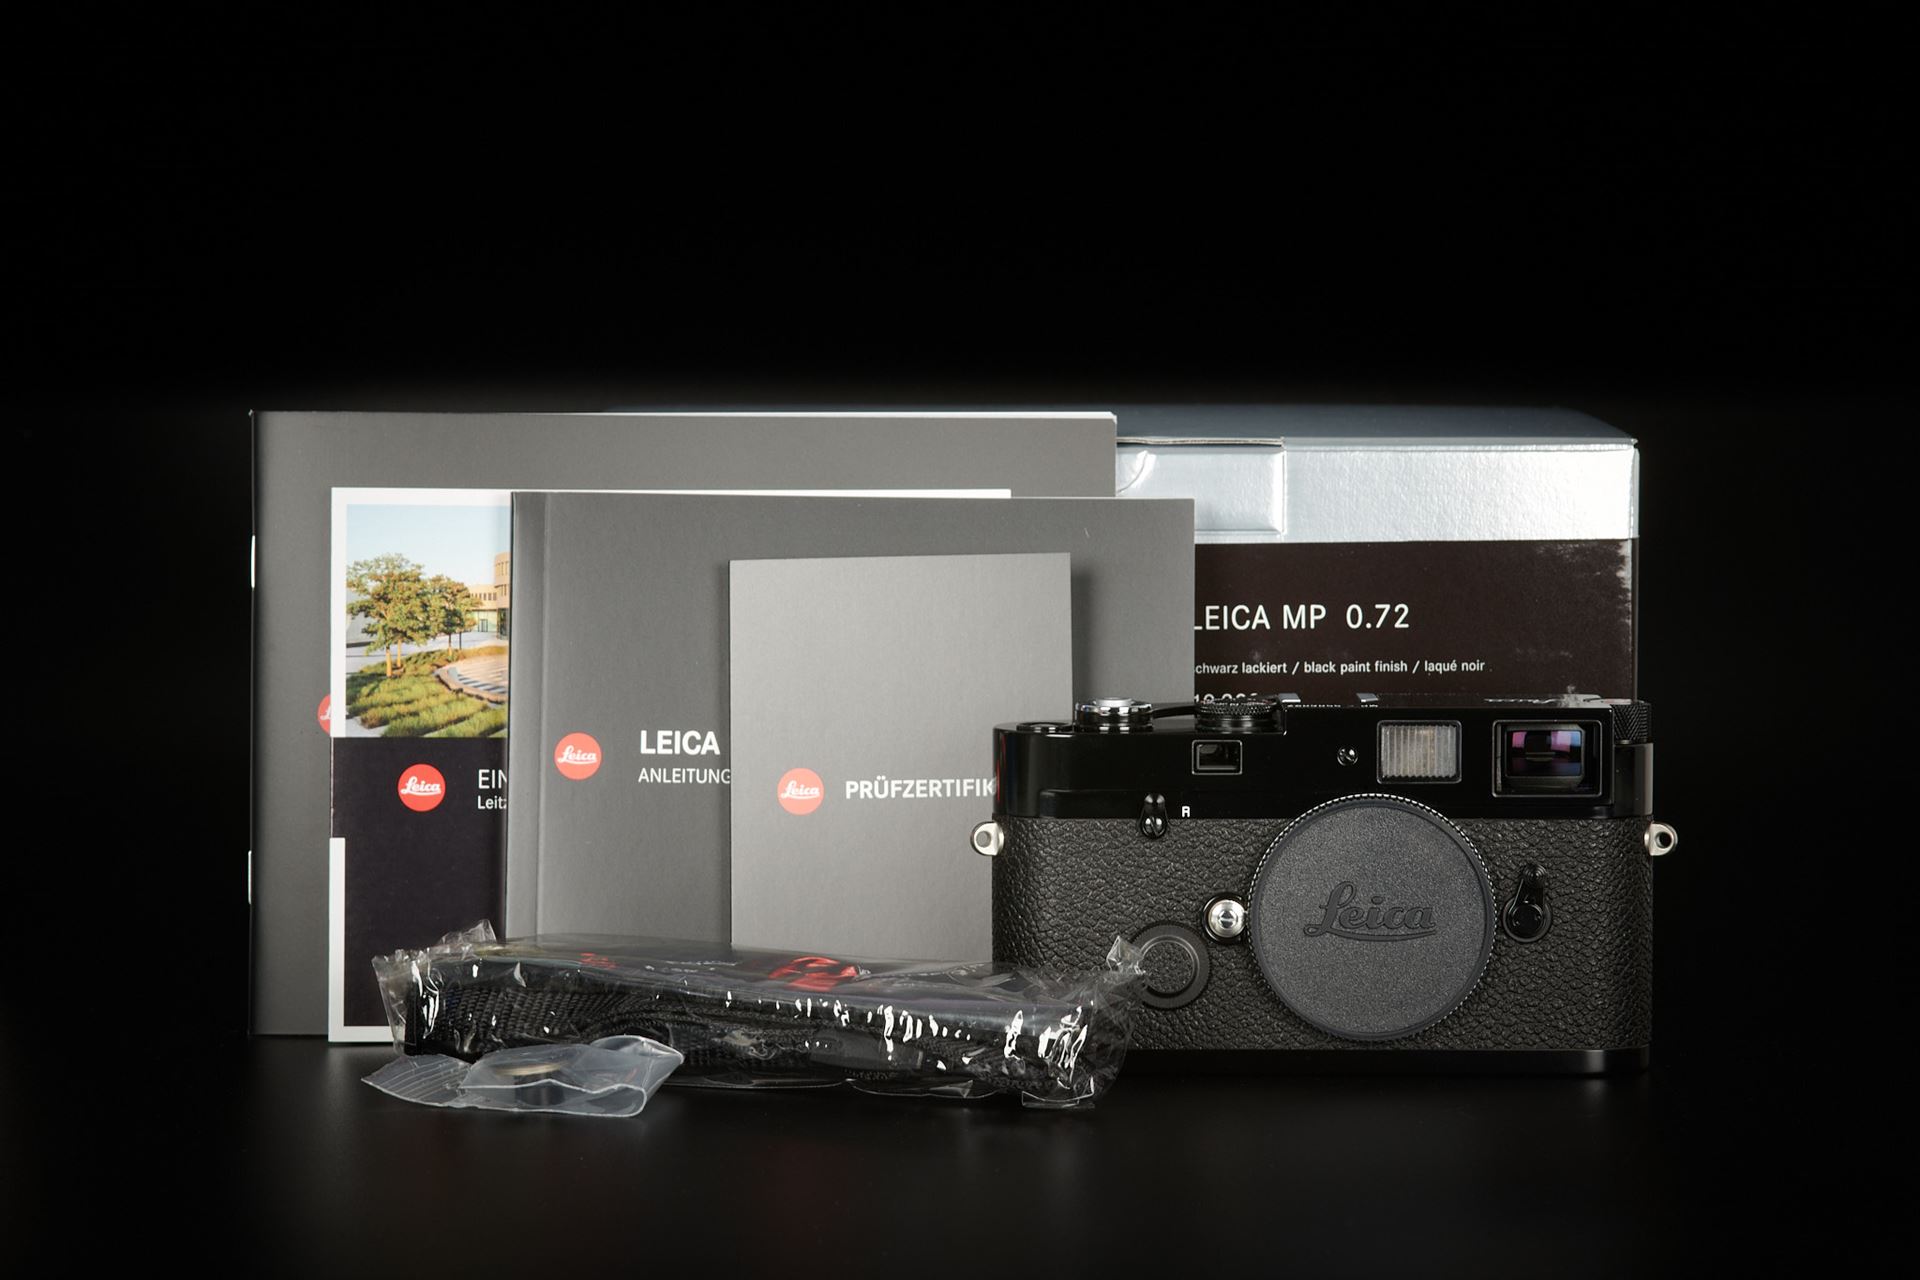 Picture of leica mp black paint